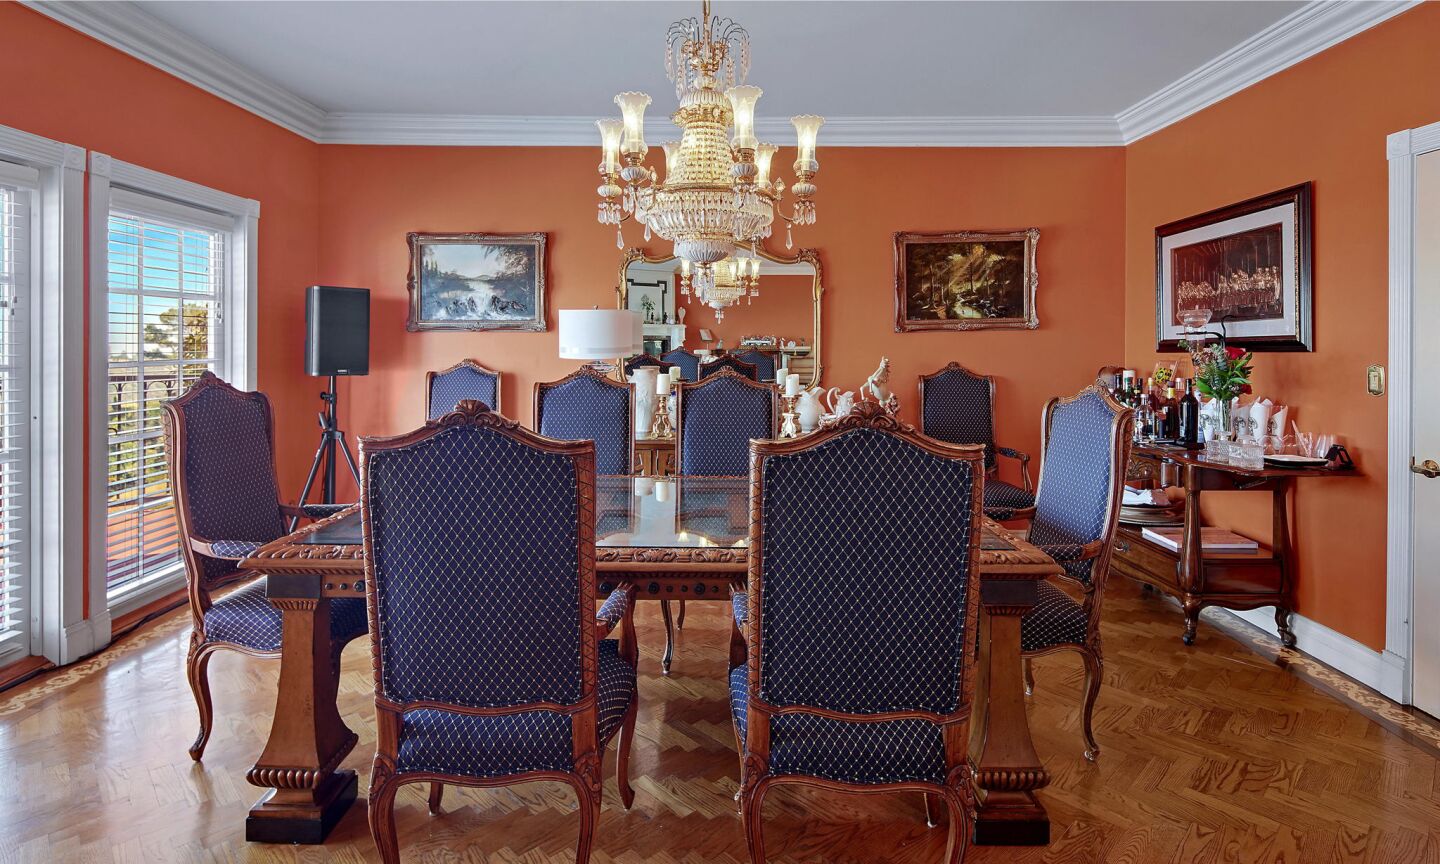 The dining room has orange walls and a dining table and chairs overlooking a window.